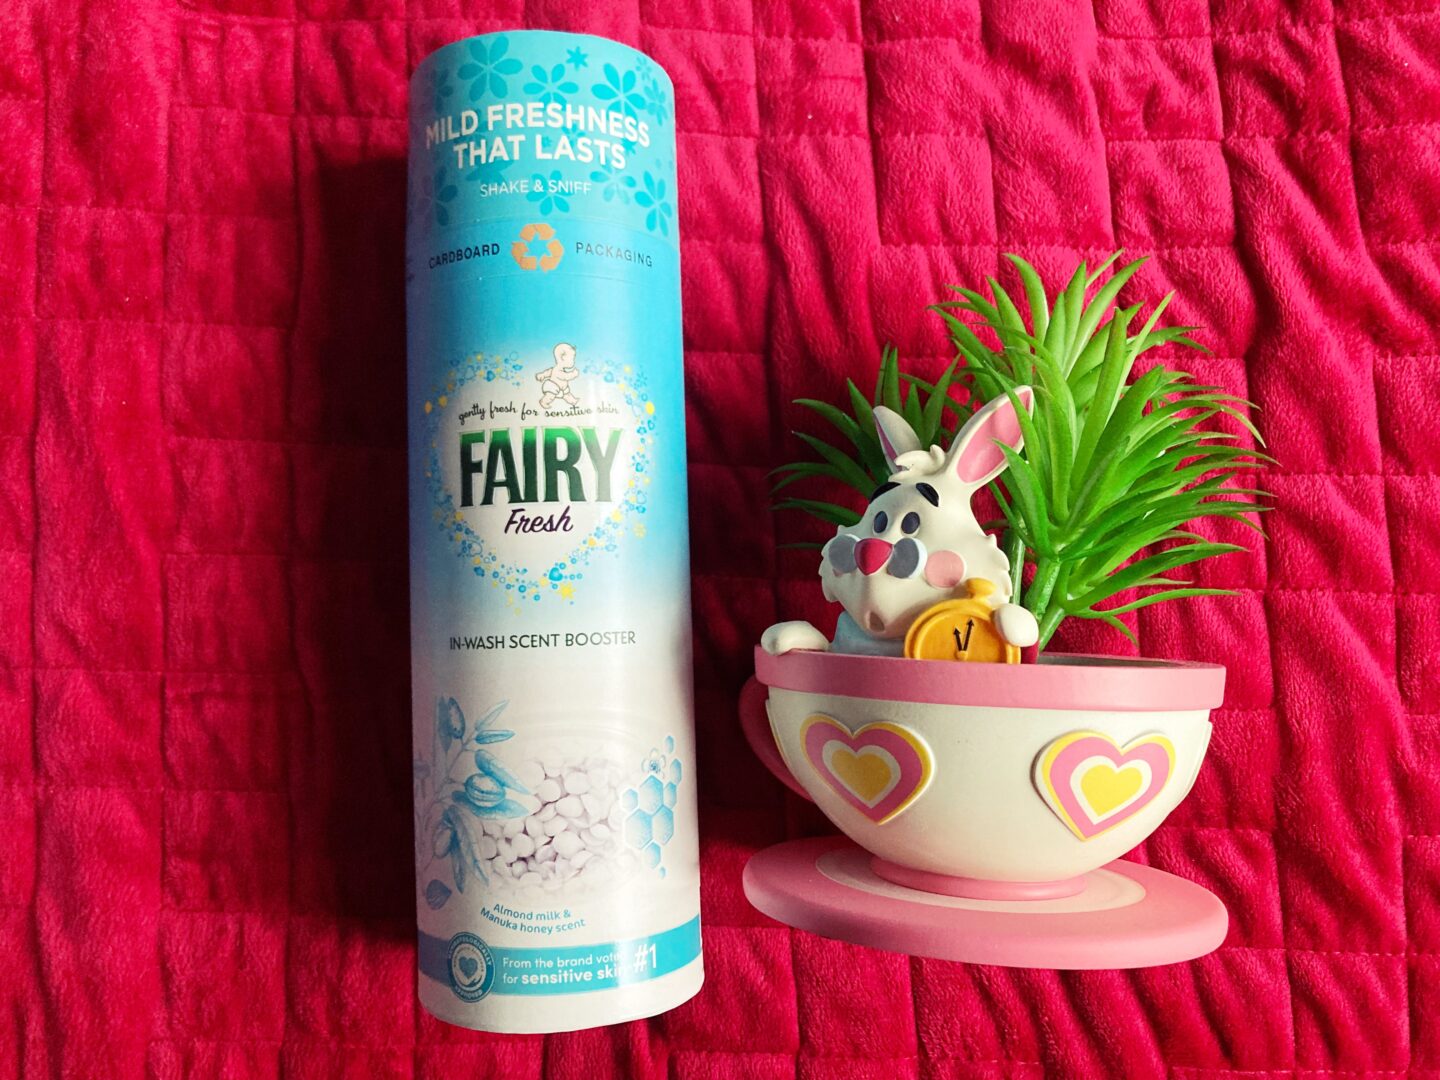 A photo of one of the Fairy Outdoorables products against a red blanket. A teacup and saucer-style potted plant in the style of Alice In Wonderland with the White Rabbit in it sits to the right of the product.